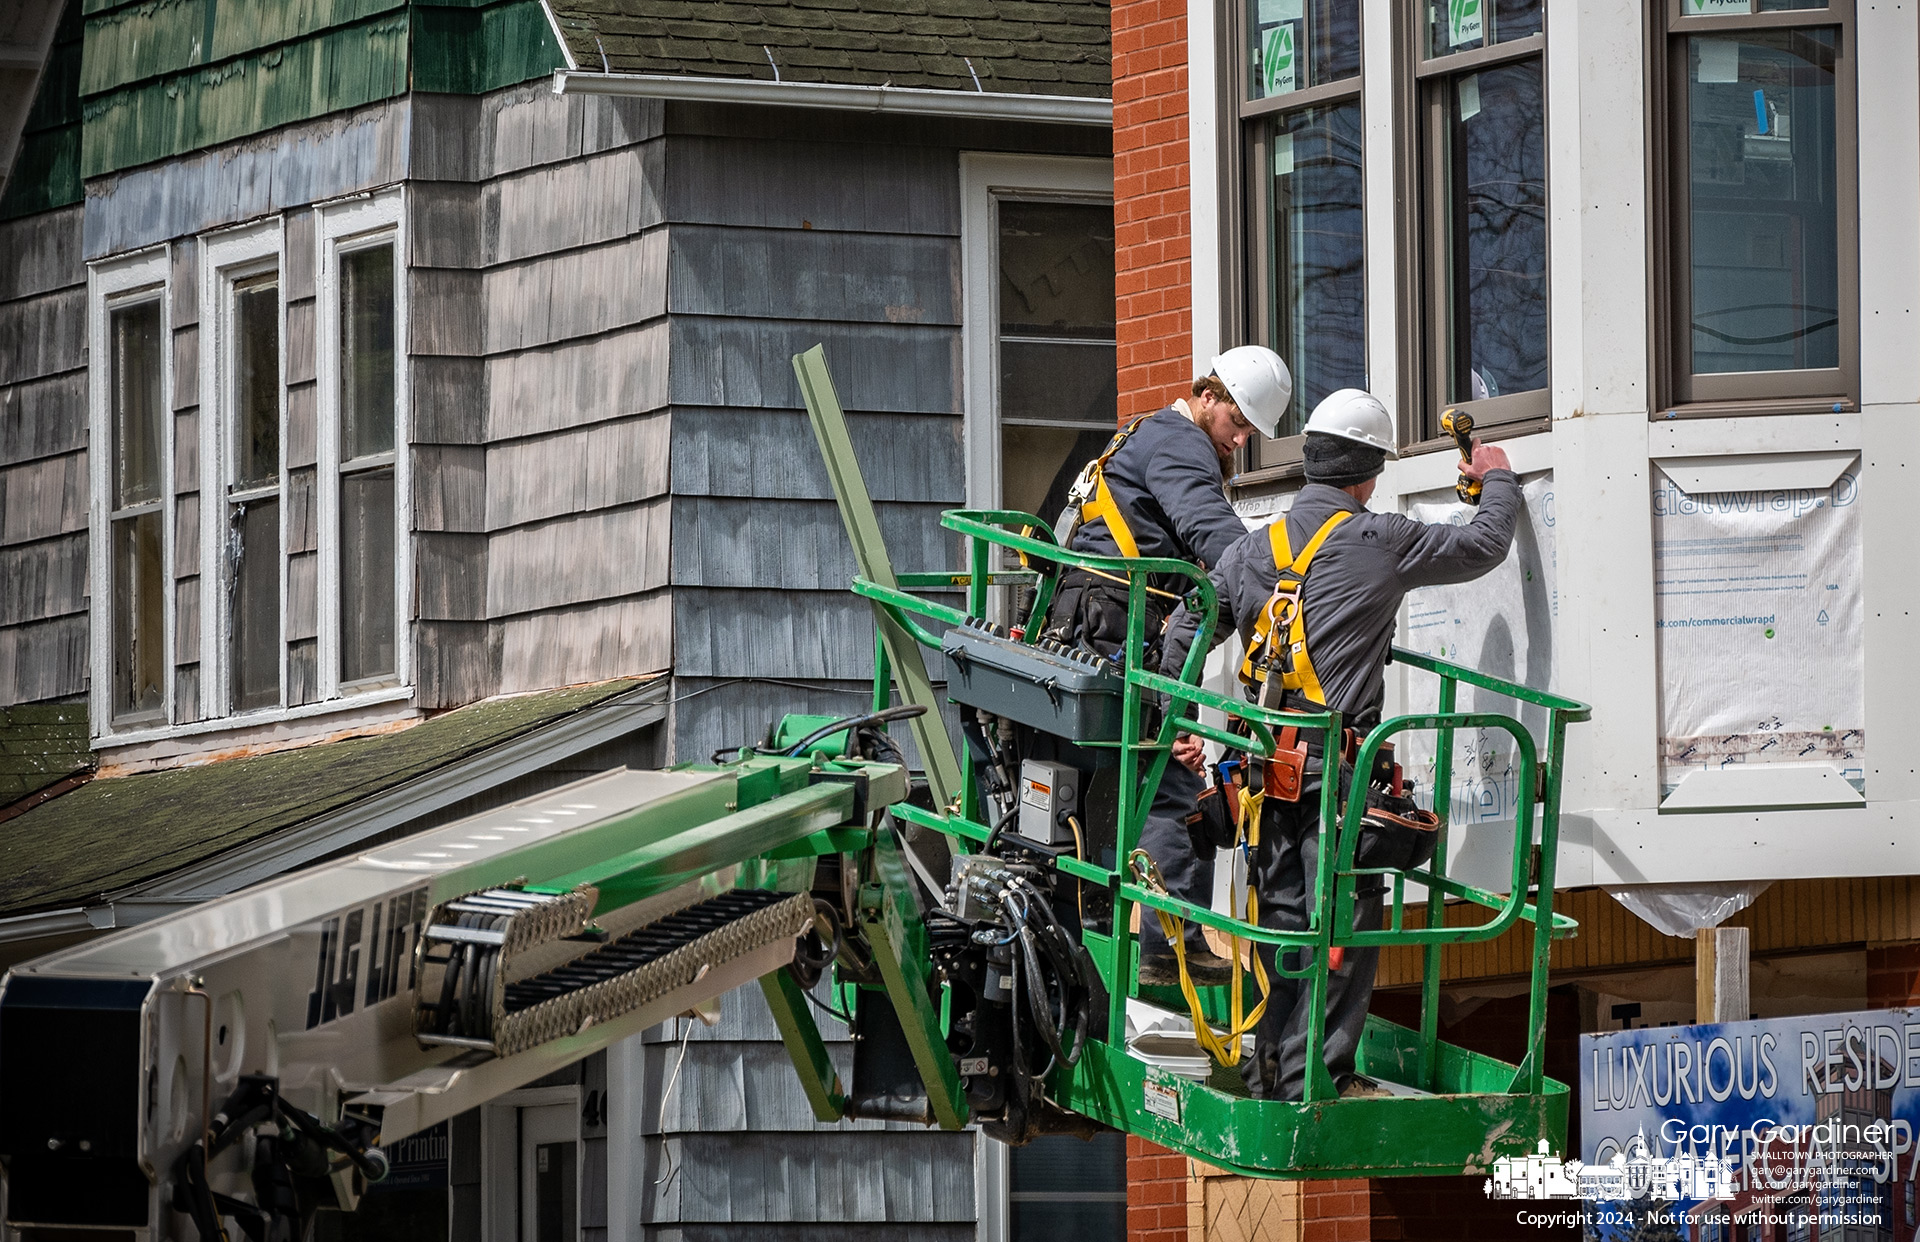 Workers install decorative trim around panels at the base of the windows of the apartment and business building under construction on West College in Uptown Westerville. My Final Photo for April 3, 2024.